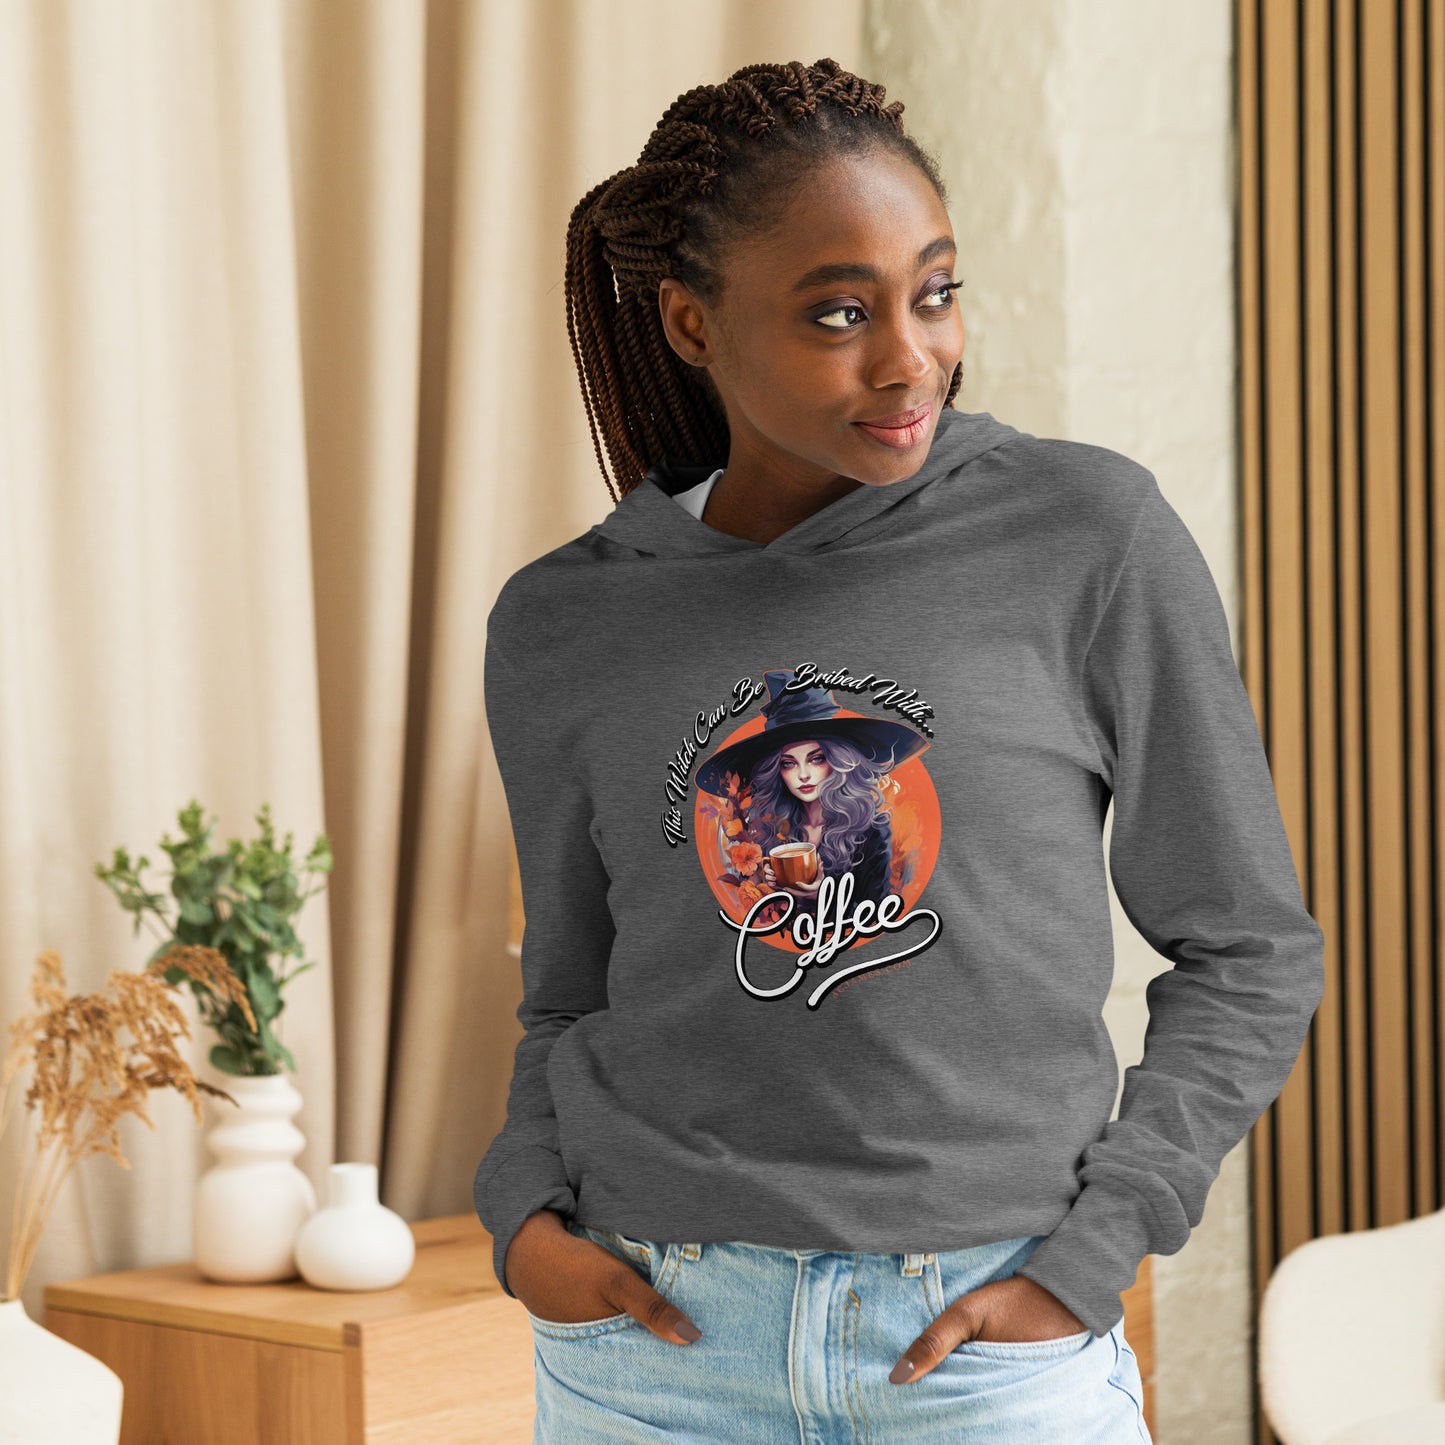 This Witch Can Be Bribed With Coffee Hooded Long-Sleeve Tee